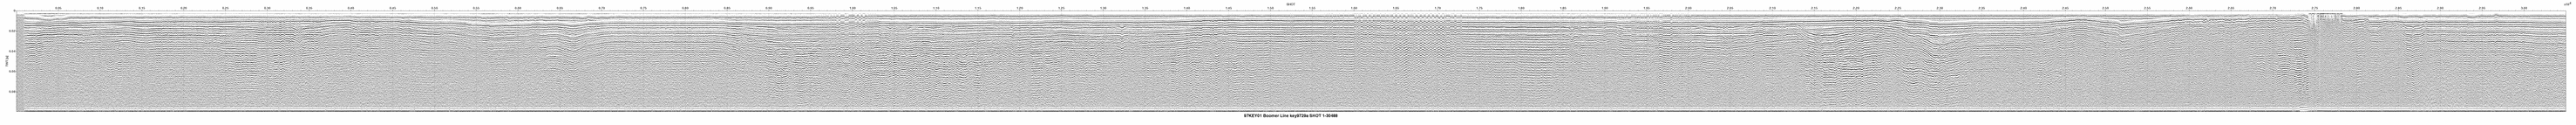 Thumbnail GIF image of the seismic trackline key9729a, with a hotlink to the more detailed, larger JPG image.